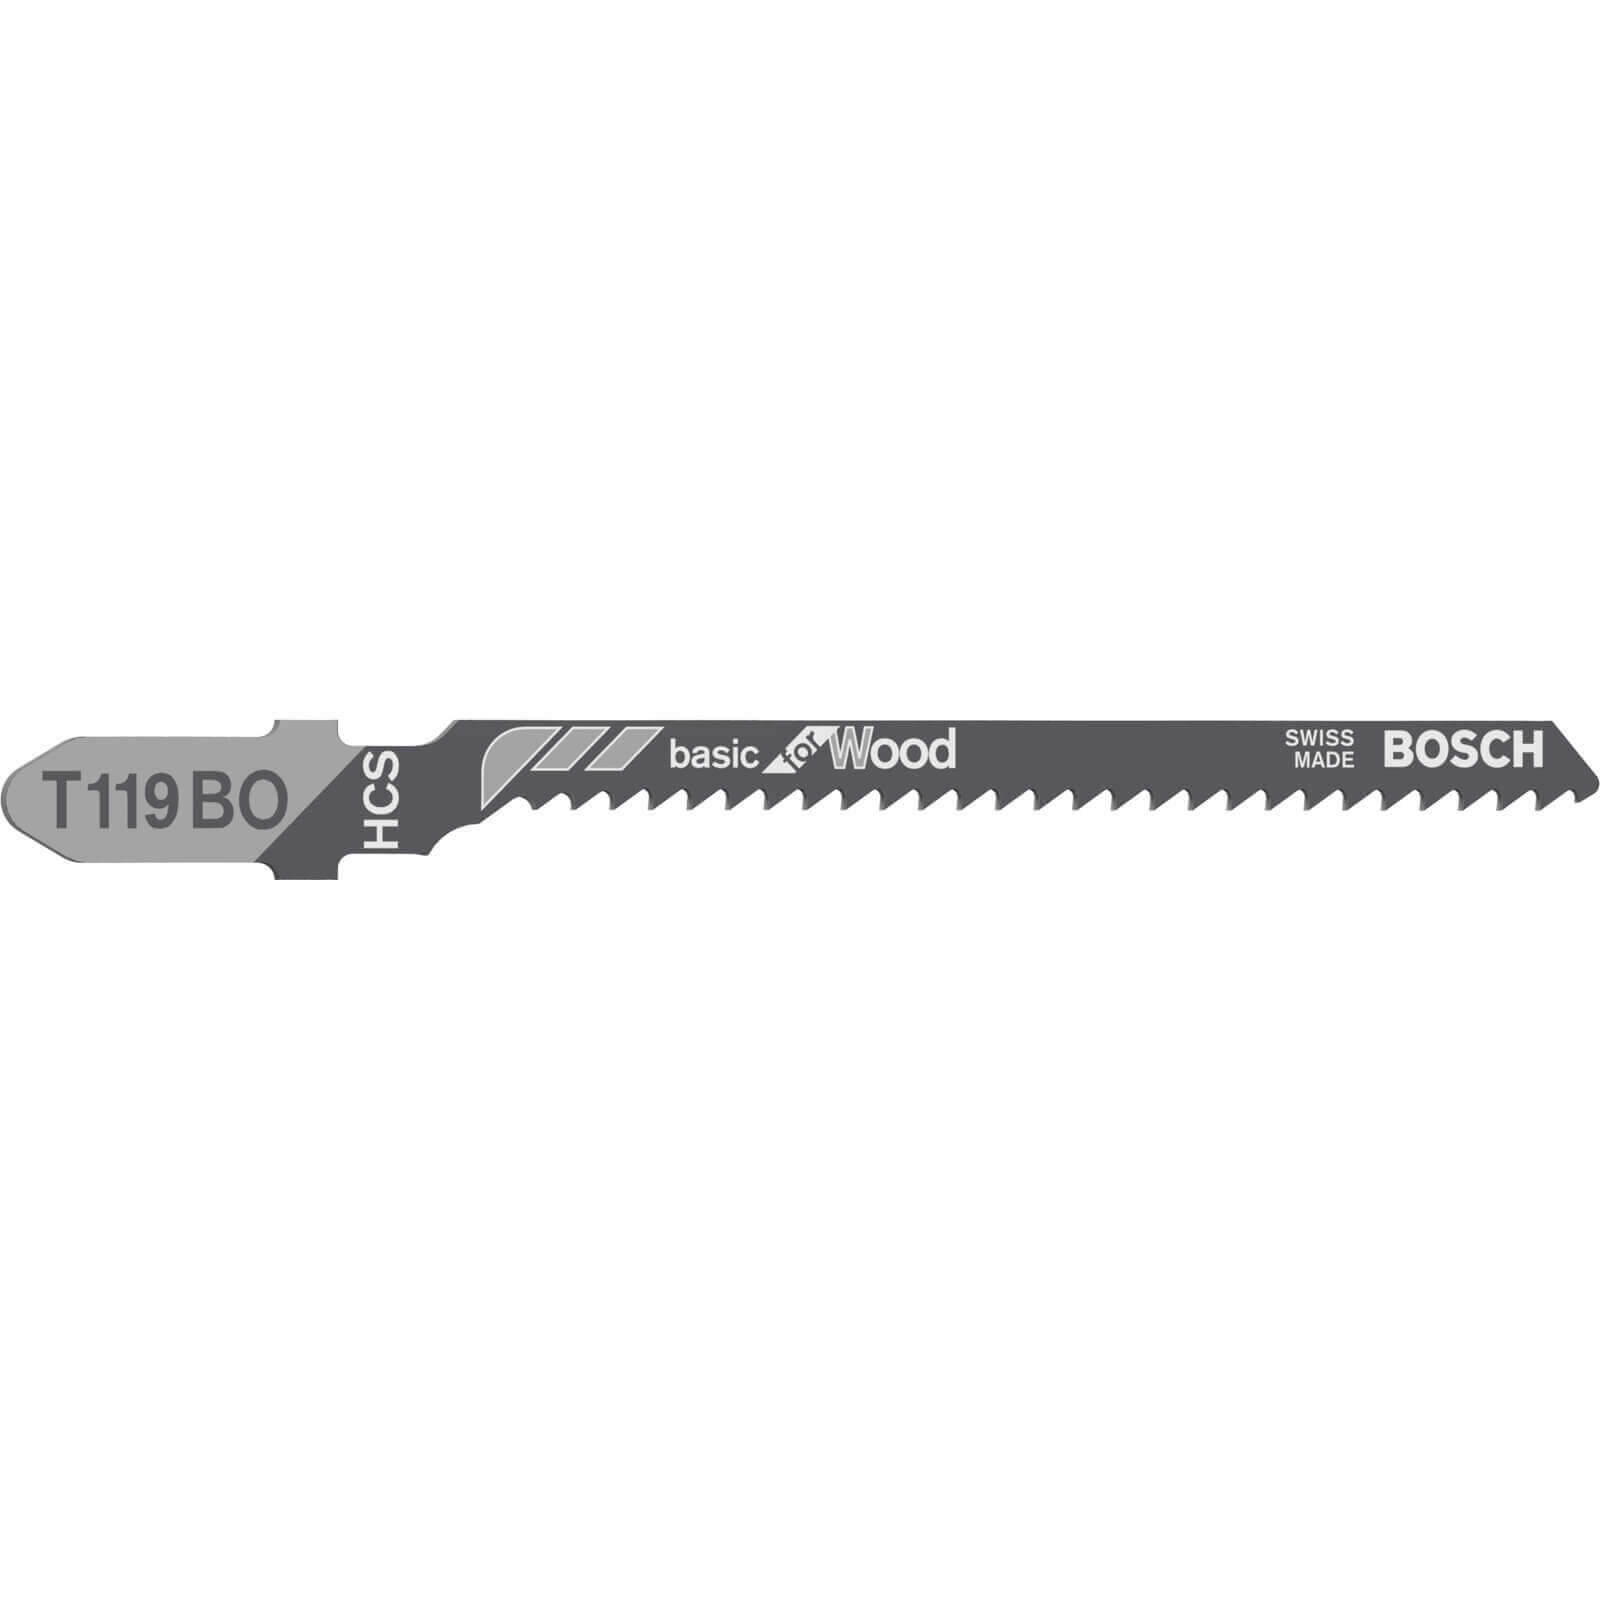 Image of Bosch T119 BO Wood Cutting Jigsaw Blades Pack of 5